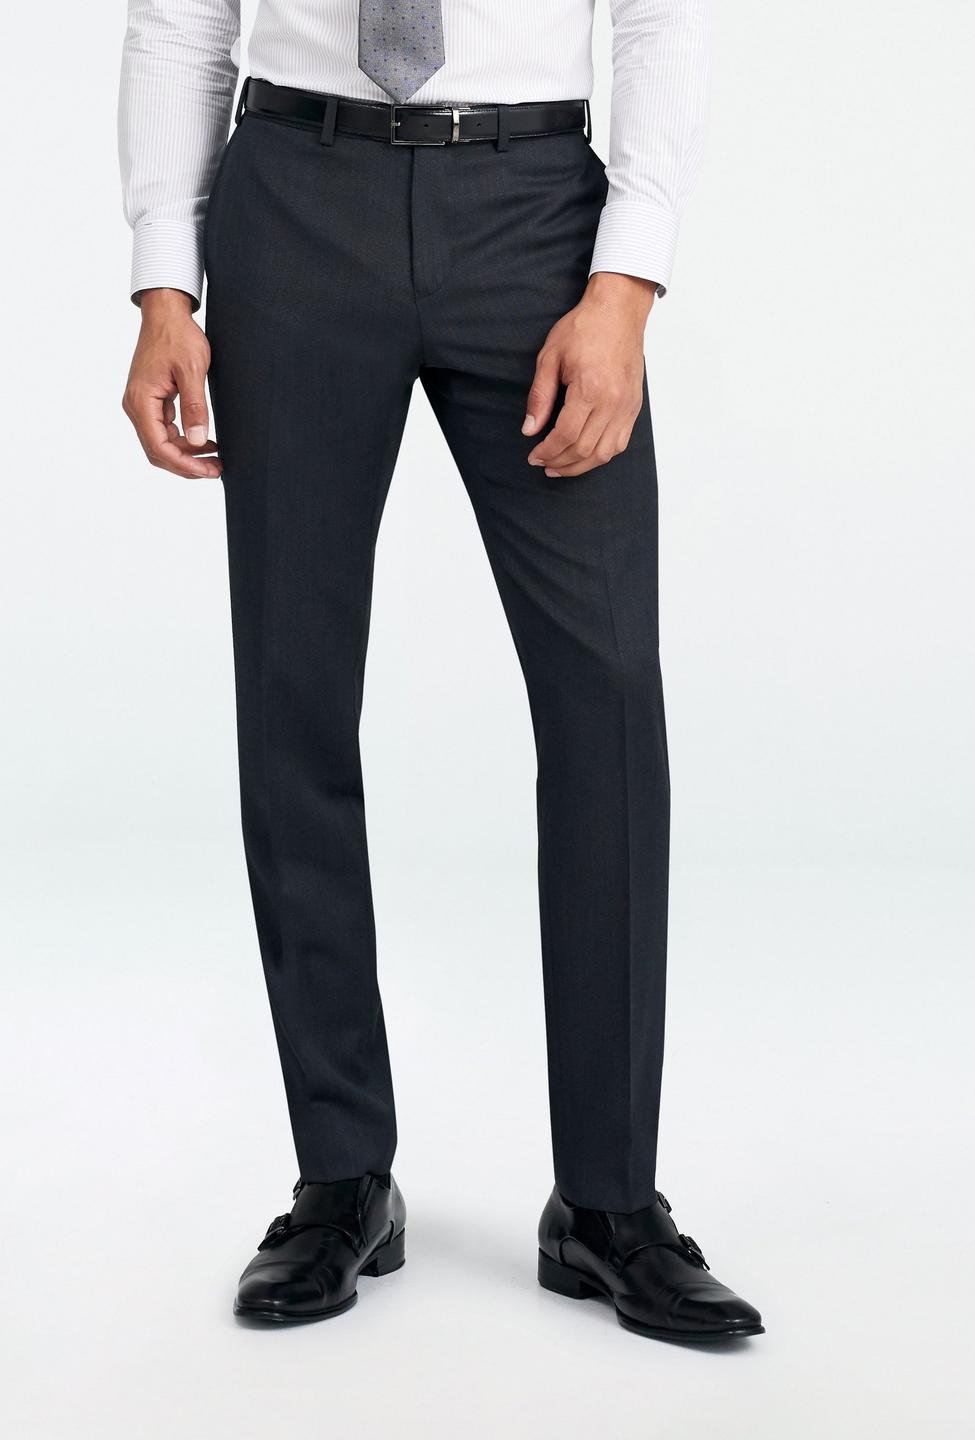 Hereford Cavalry Twill Charcoal Pants